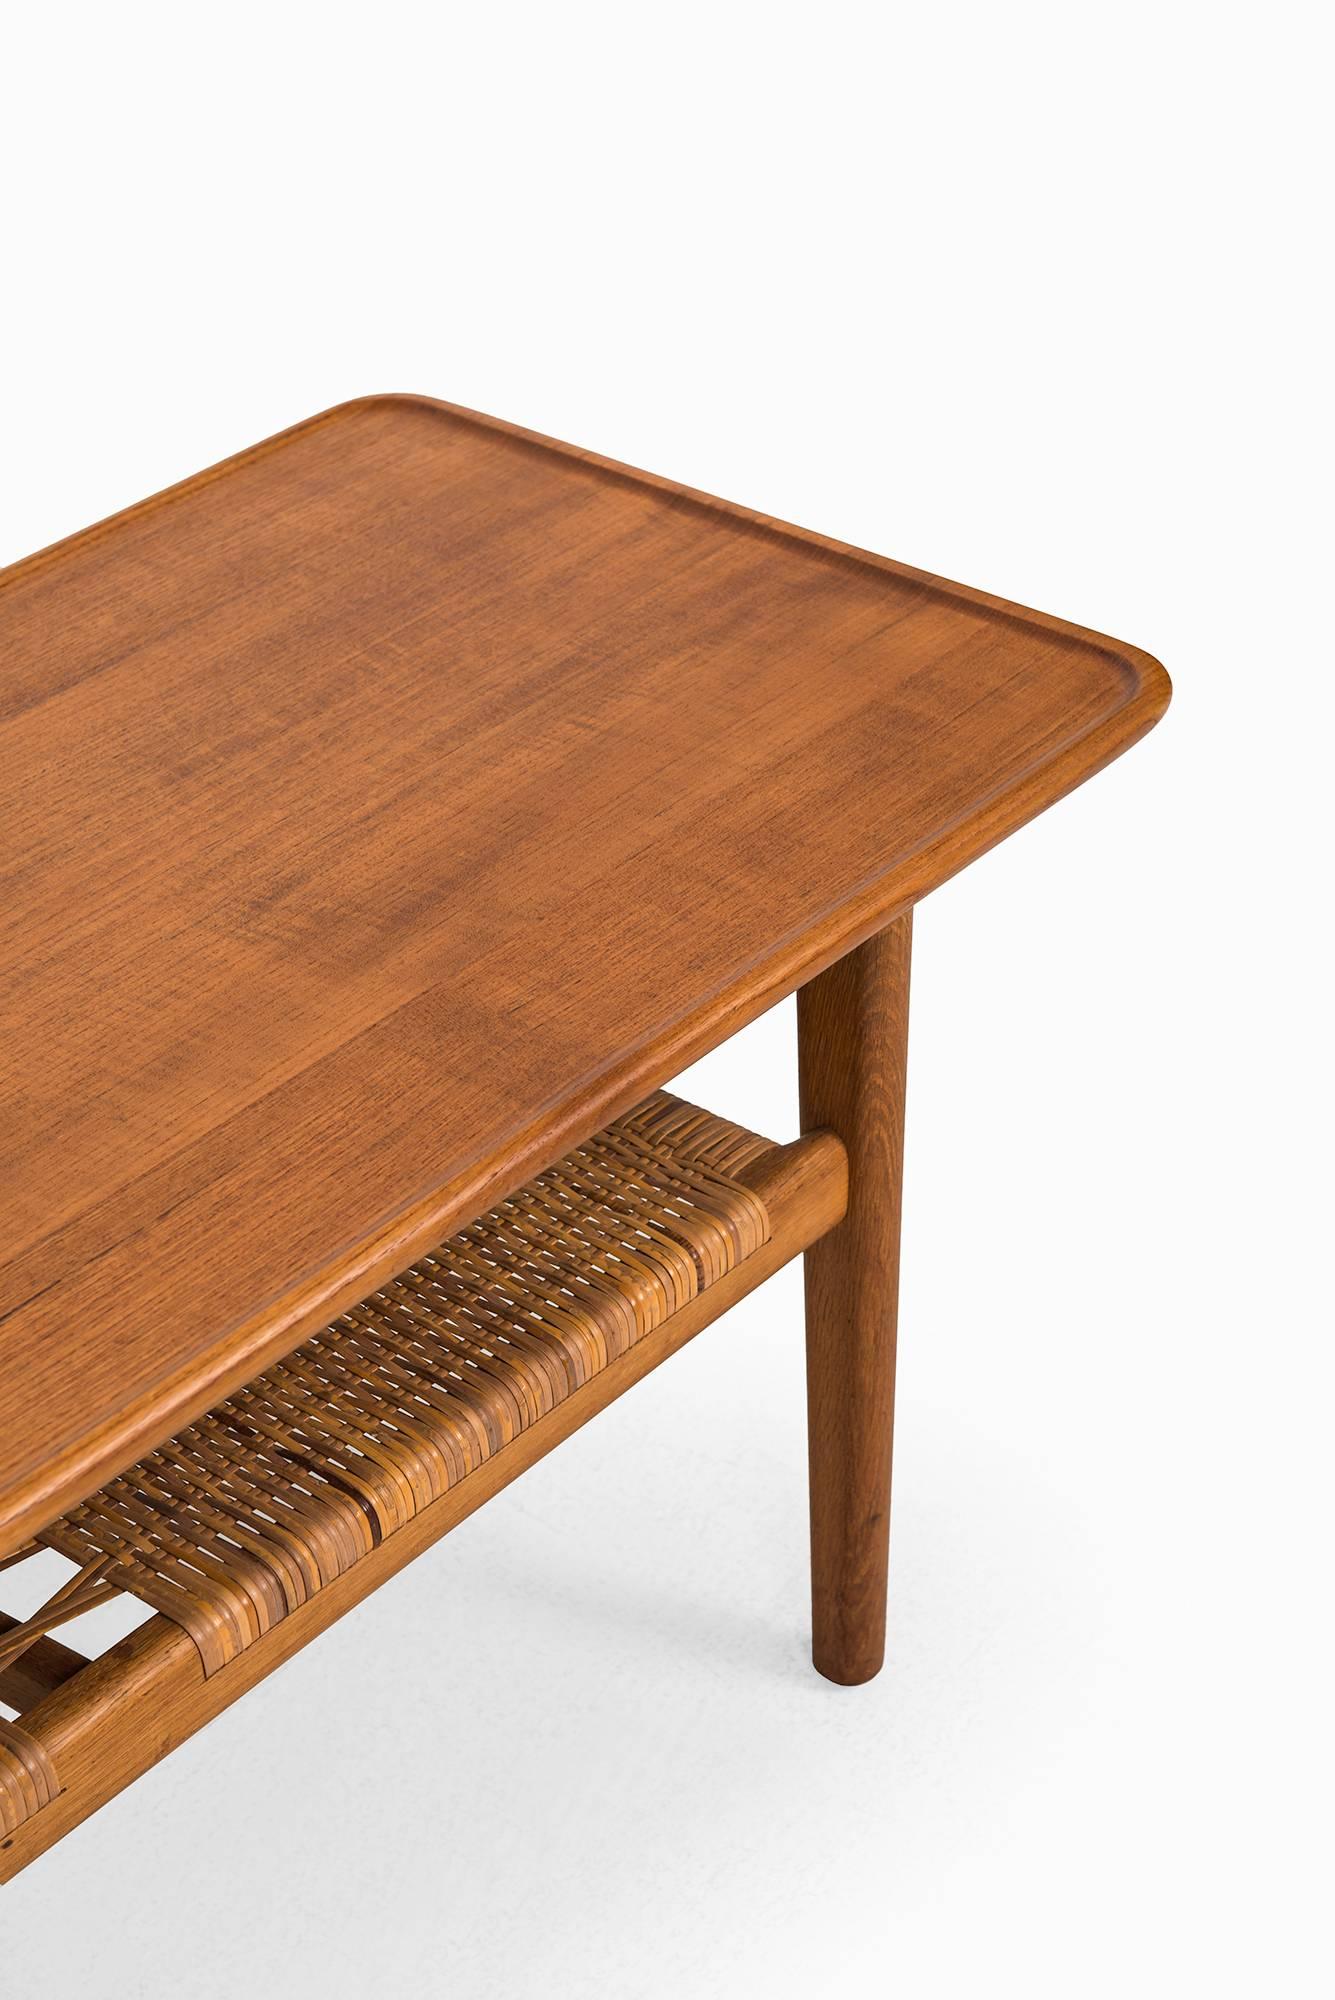 Coffee table model AT-10 designed by Hans Wegner. Produced by Andreas Tuck in Denmark.